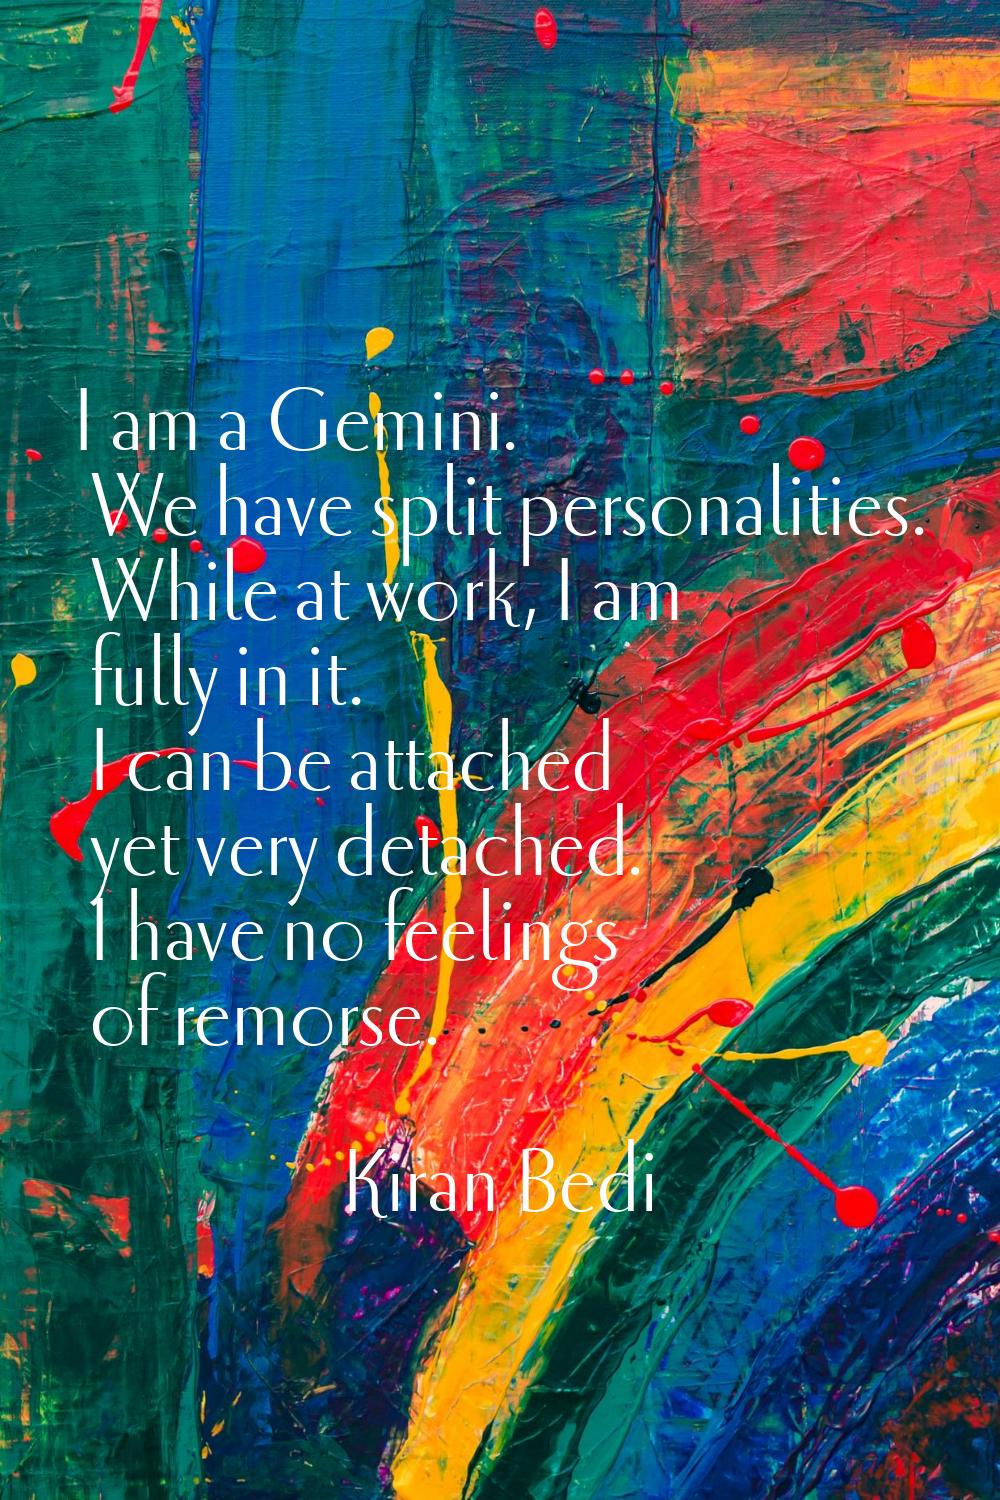 I am a Gemini. We have split personalities. While at work, I am fully in it. I can be attached yet 